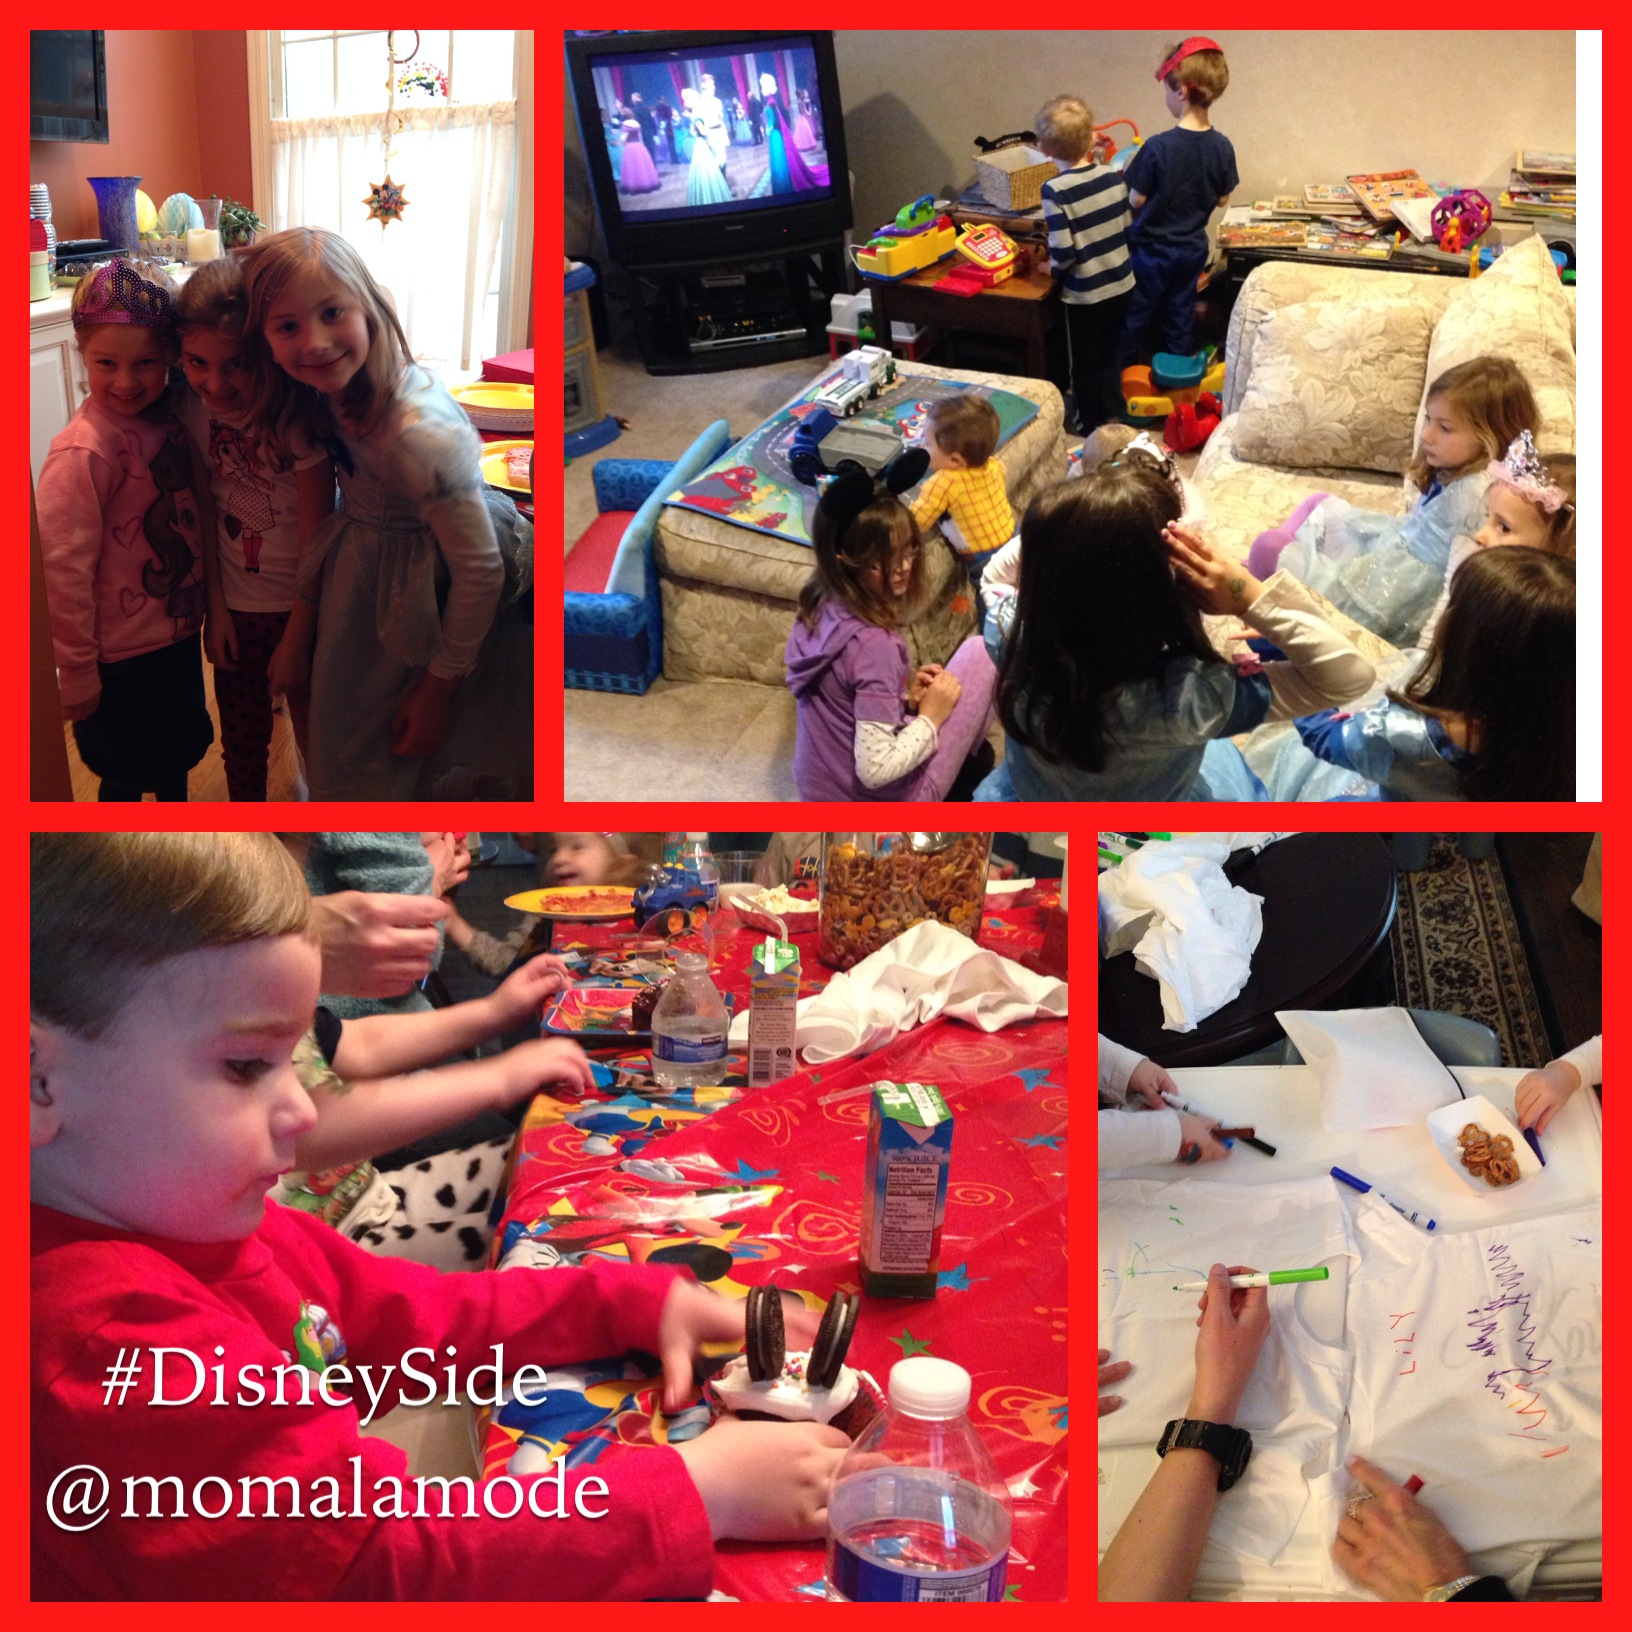 We watched Frozen and had fun making t-shirts and our own Mouse-ear cupcakes.